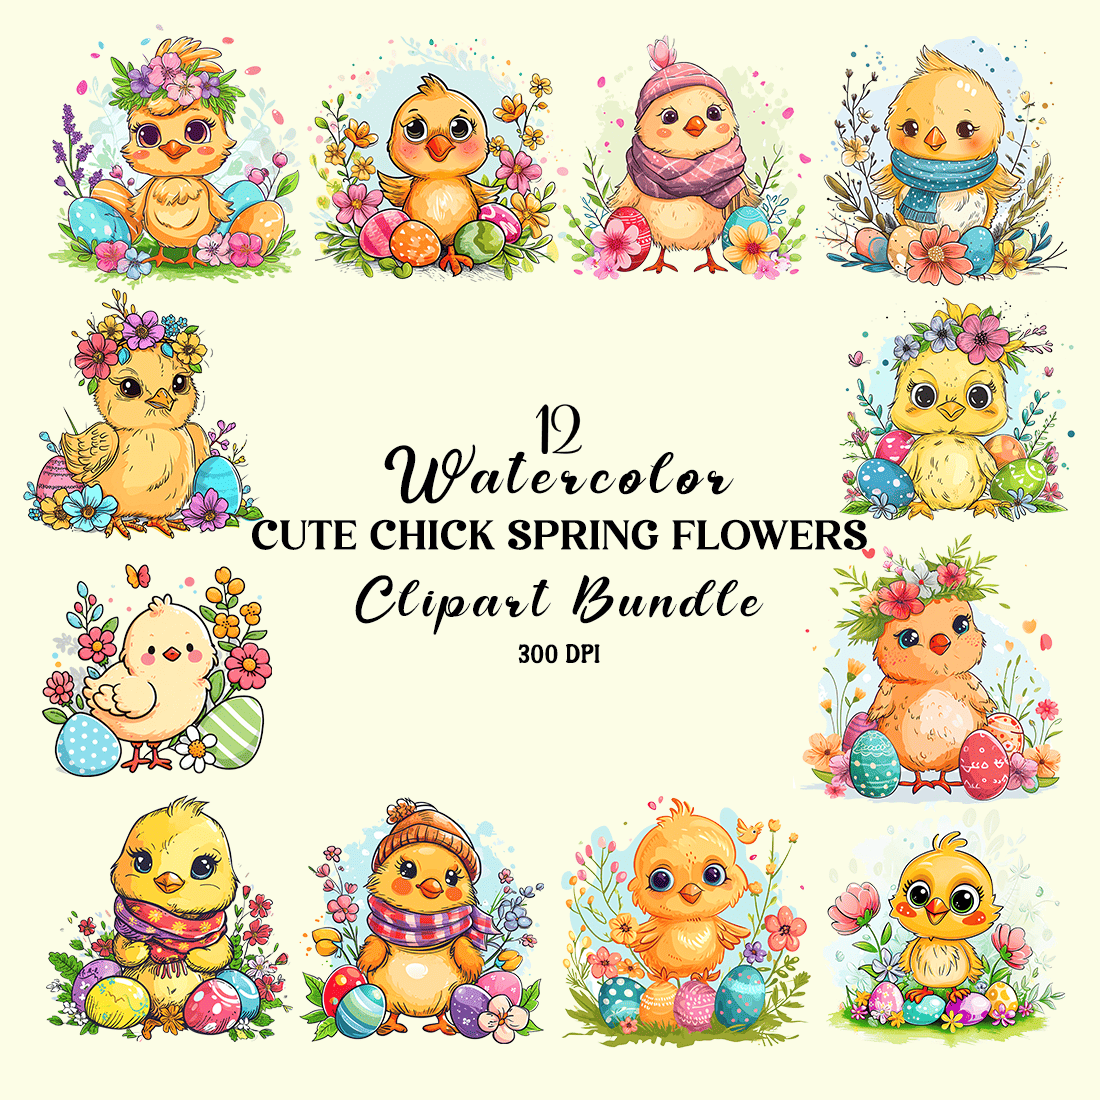 Cute Chick Spring Flowers Clipart Bundle cover image.